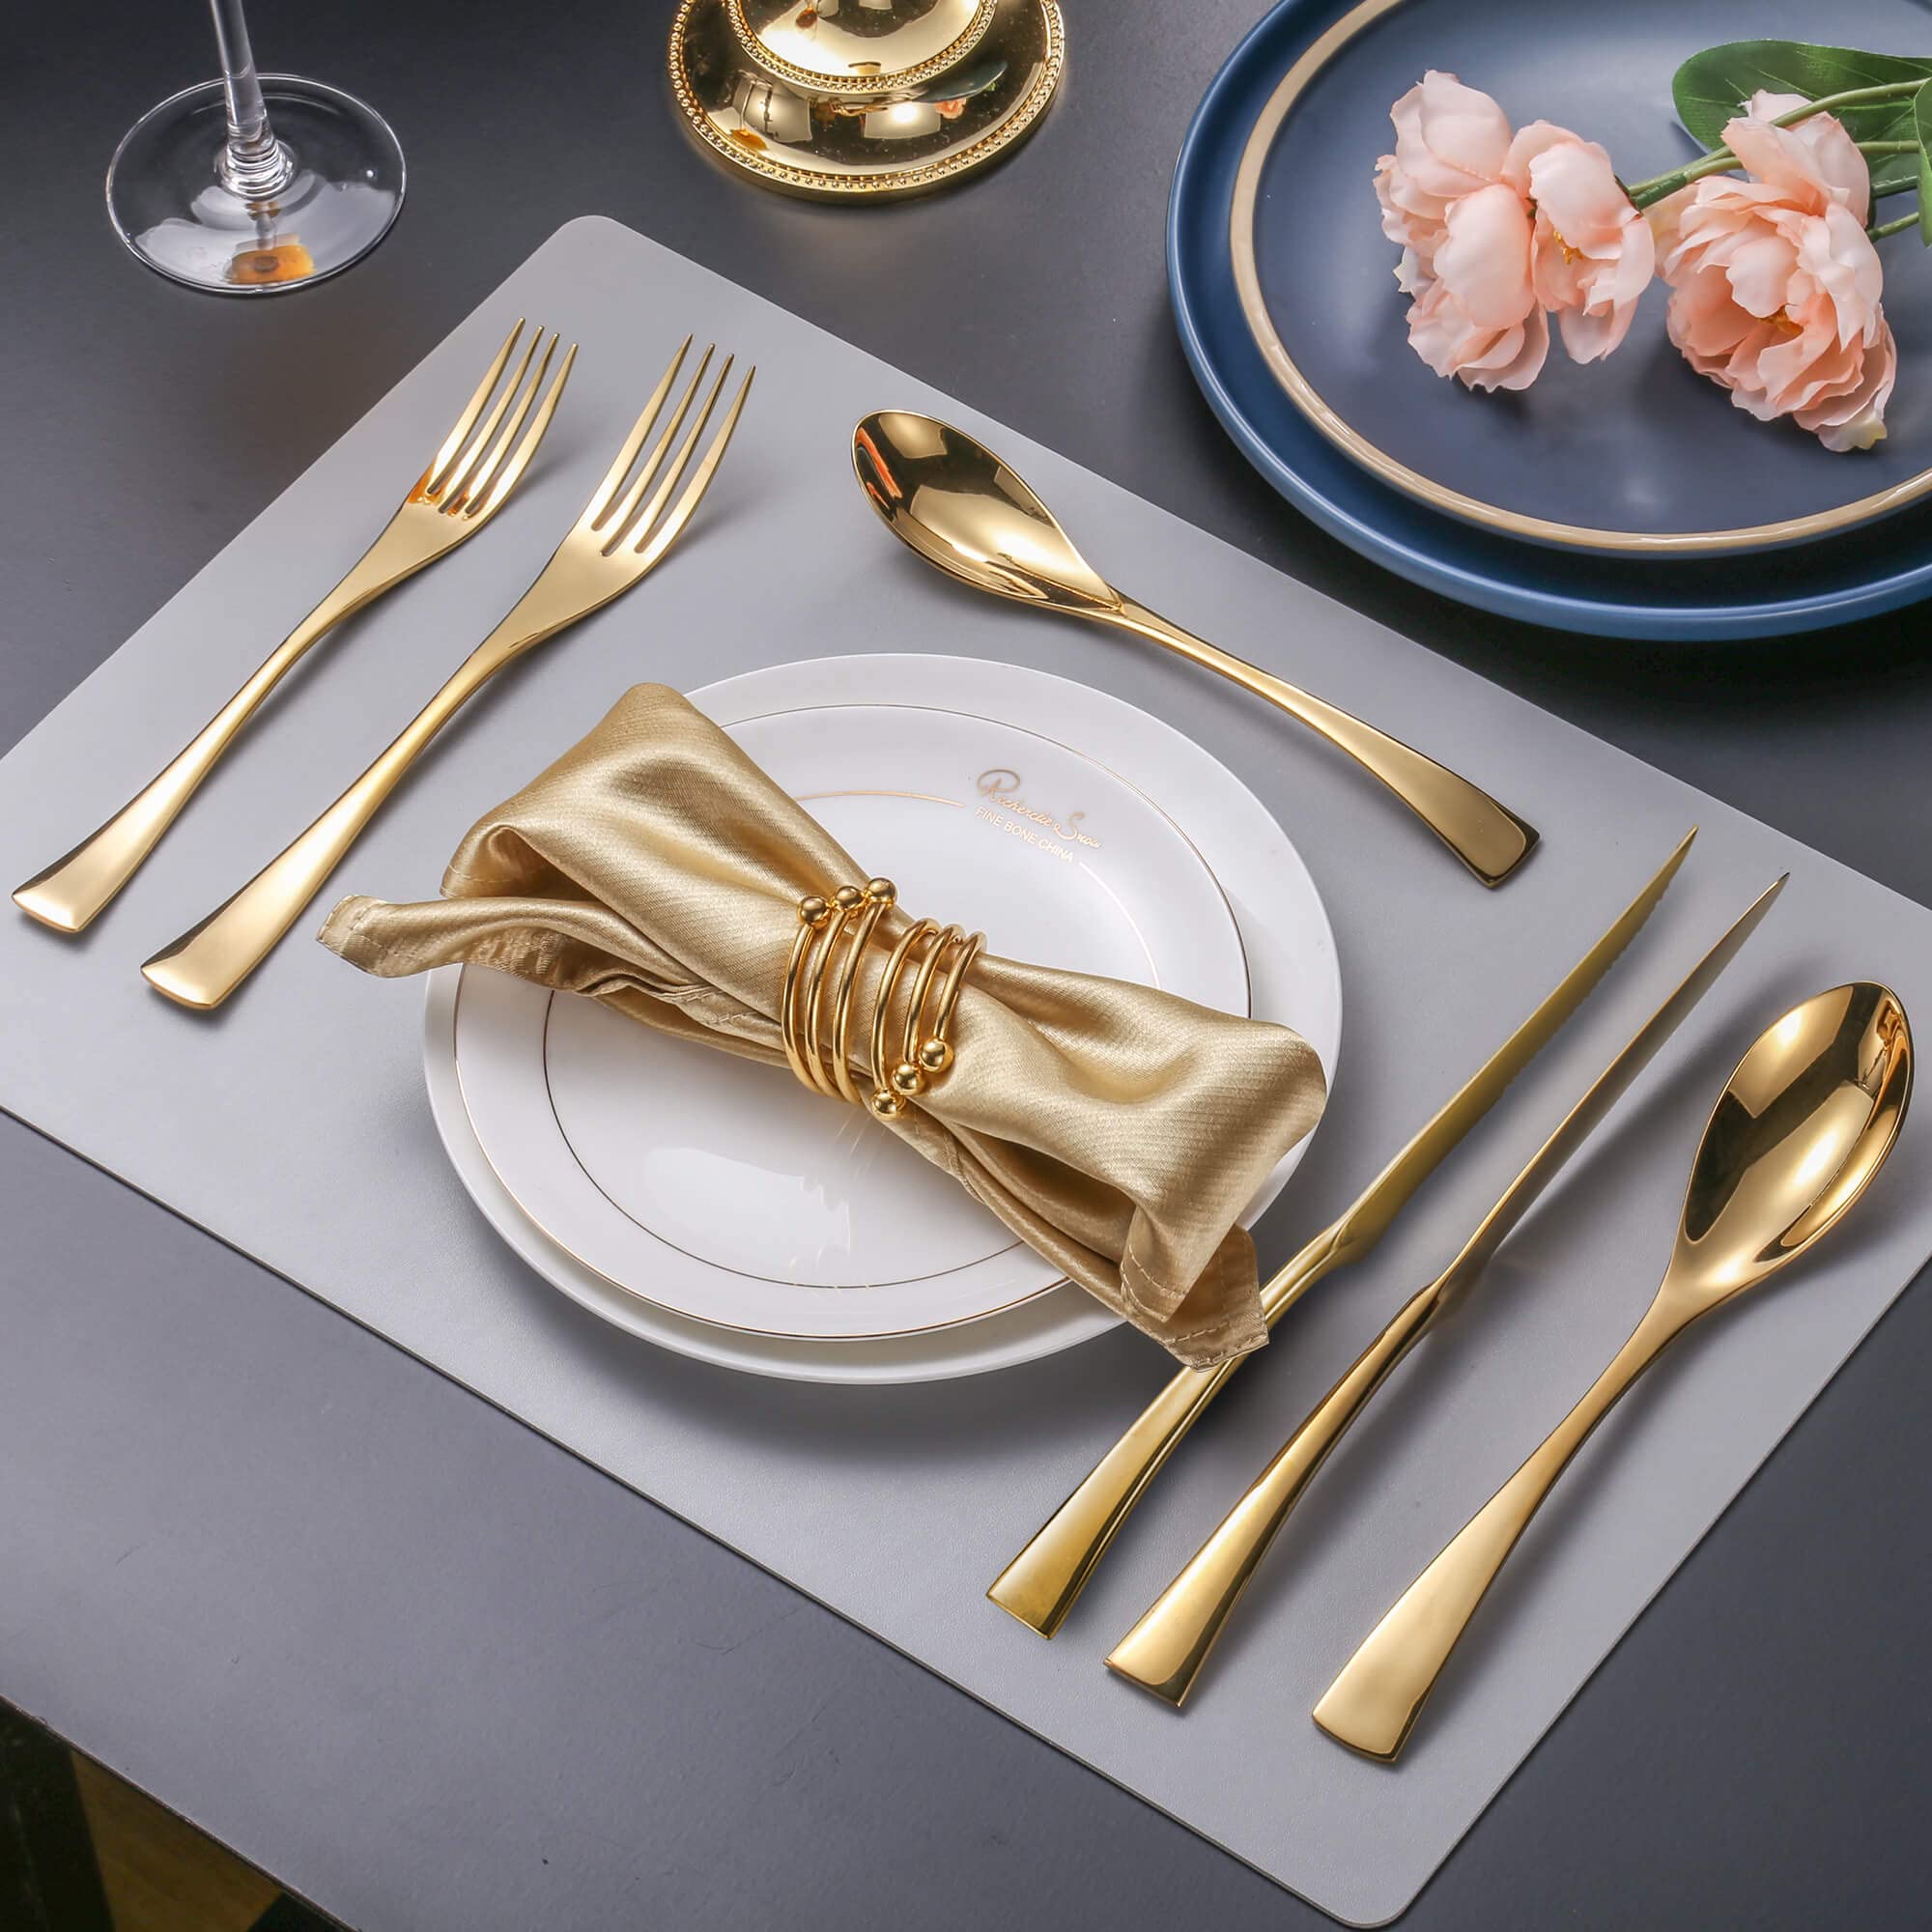 Lemeya 24 Piece Gold Silverware Set with Steak Knives,18/10 Stainless Steel Cutlery Utensils Modern Flatware Set Service for 4,Include Knife/Fork/Spoon, Mirror Polished,Dishwasher Safe